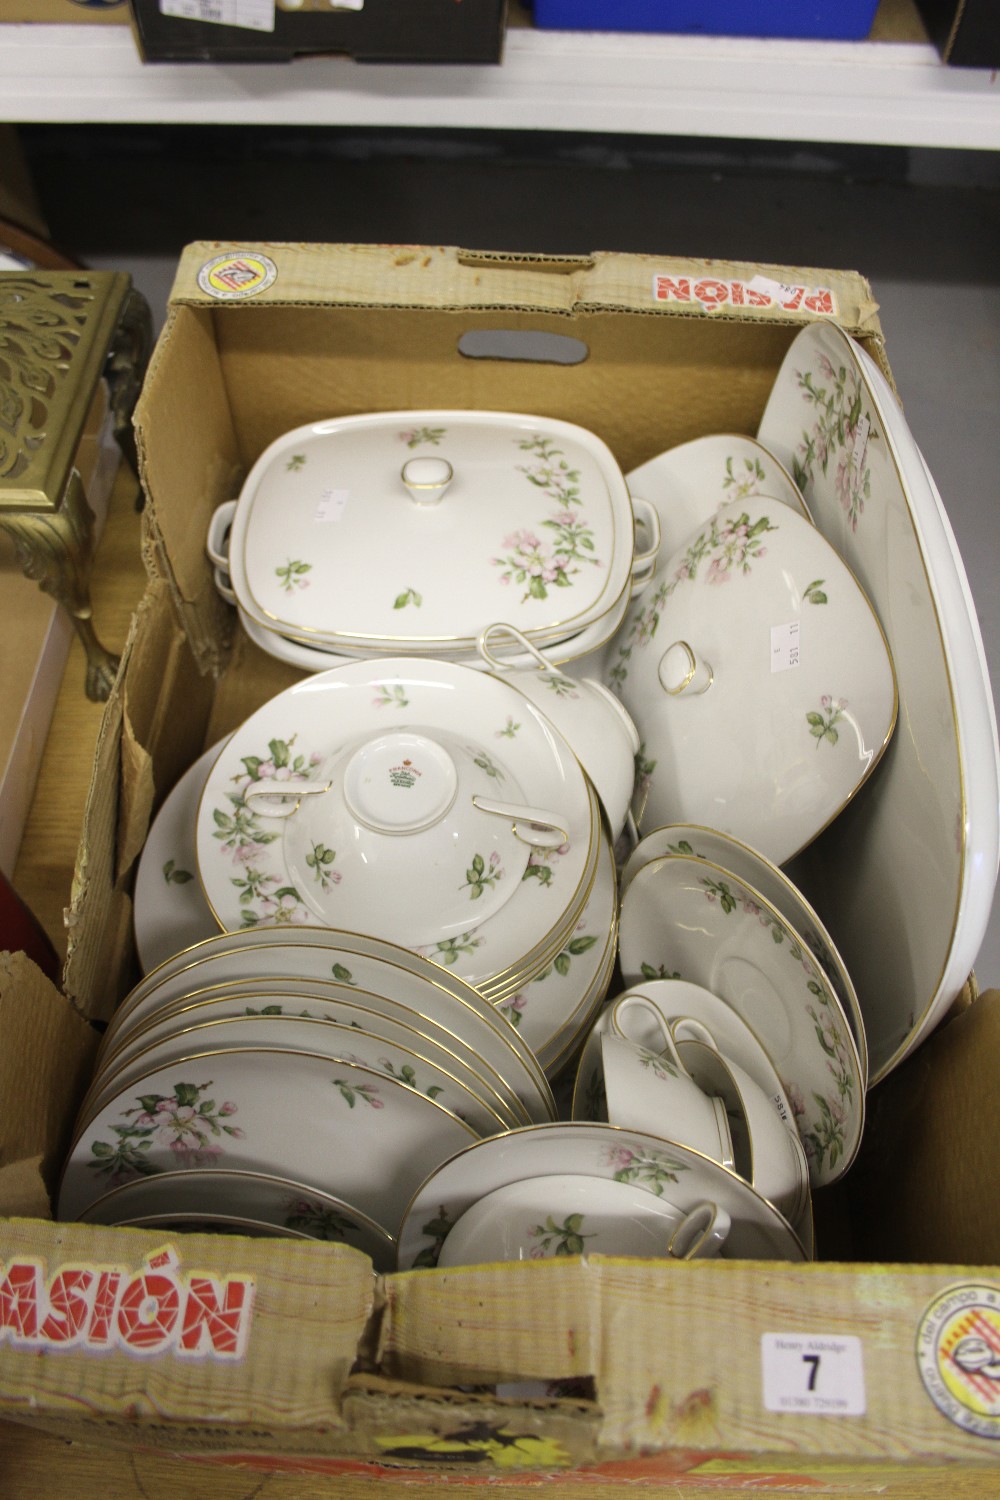 20th cent. Ceramics: Franconia "Apple Blossom" 6 place settings sets a pair of tureens and covers, 5